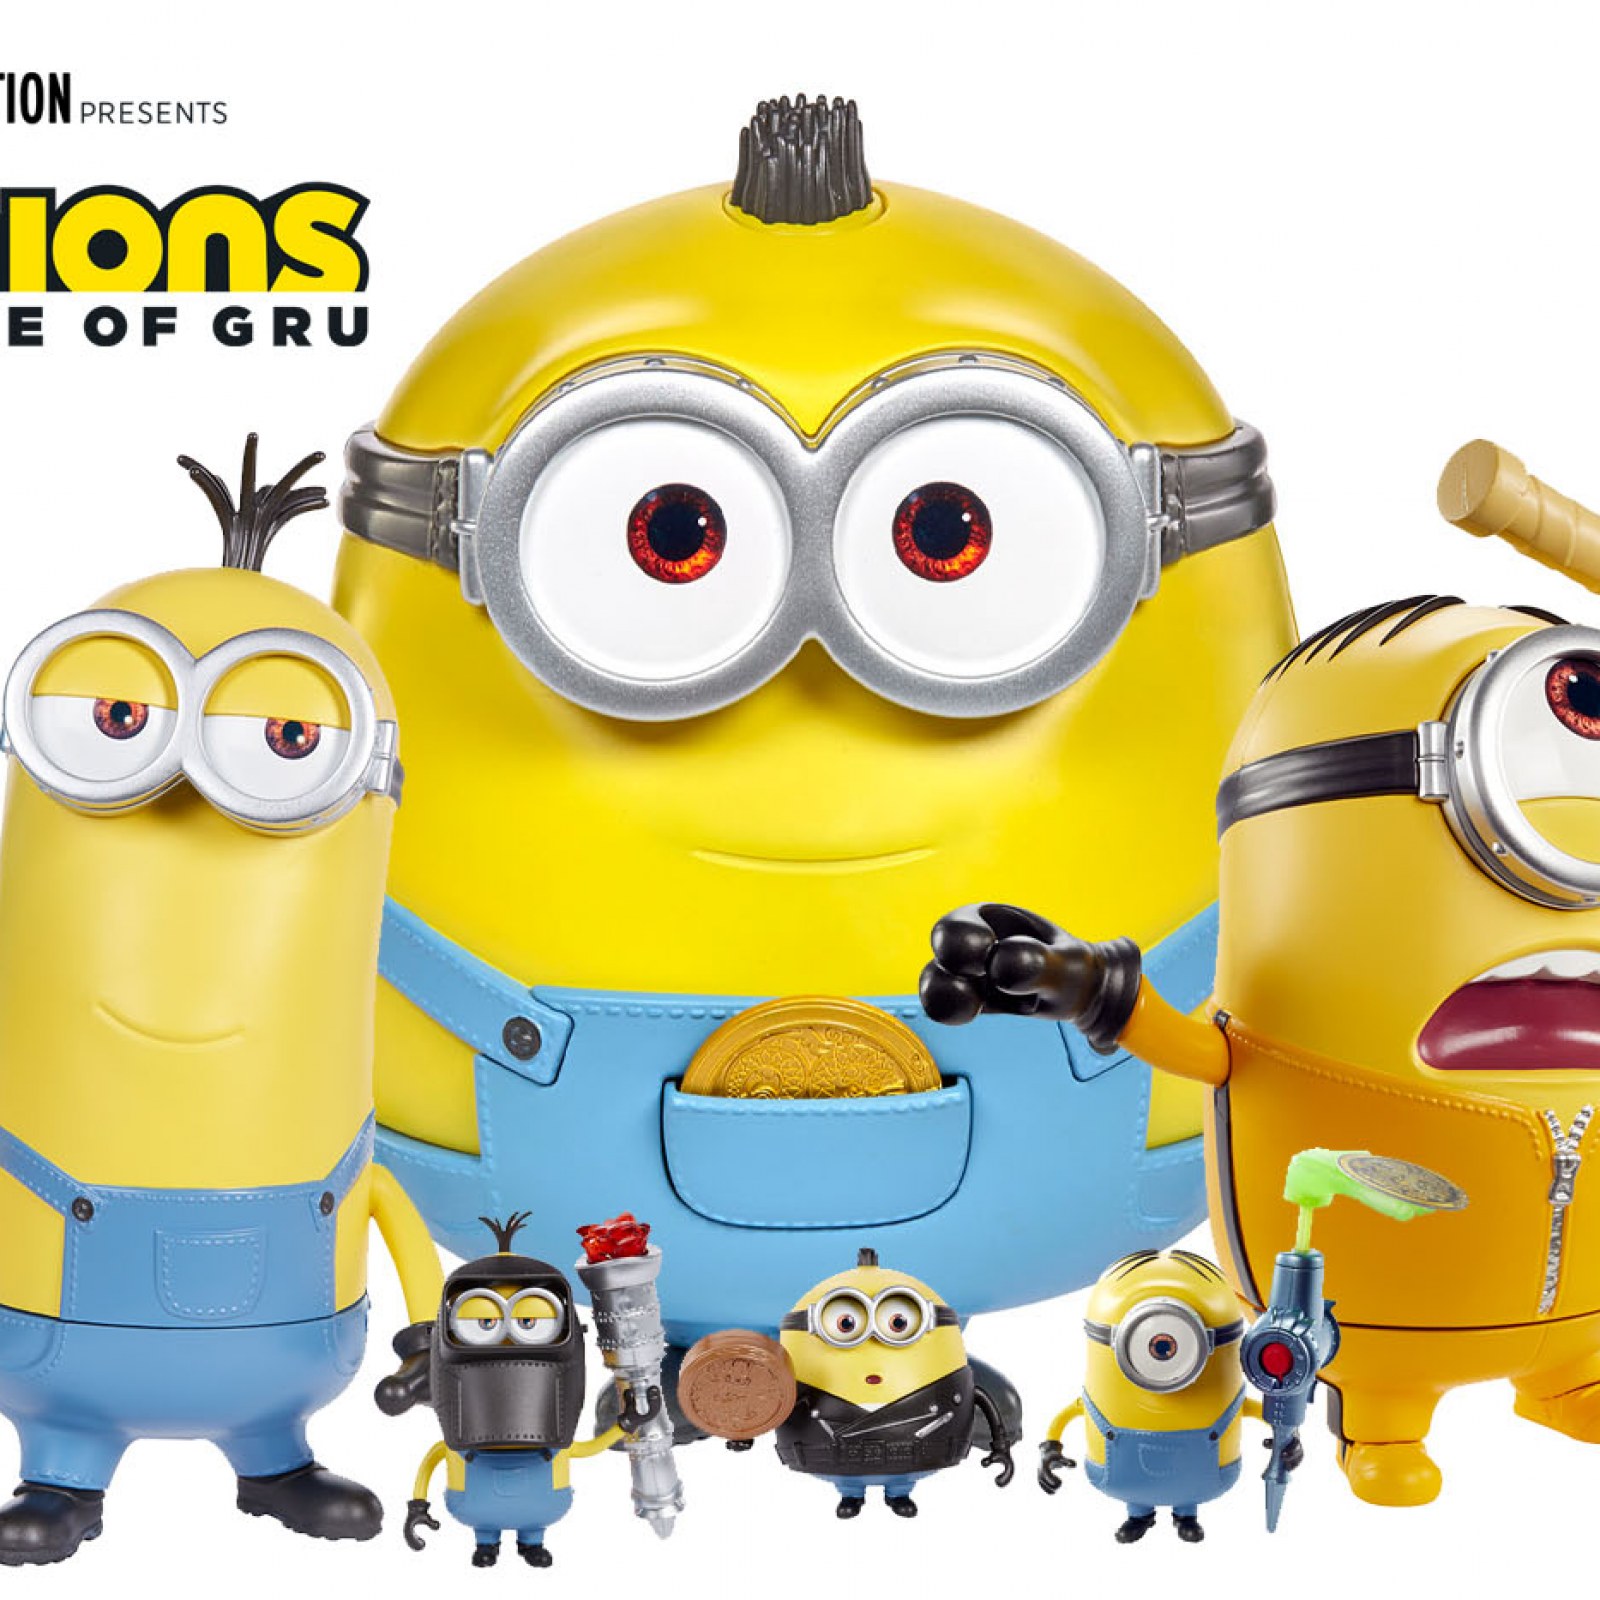 Exclusive: 'Minions: The Rise of Gru' Toys Releasing From Mattel in Spring 2020